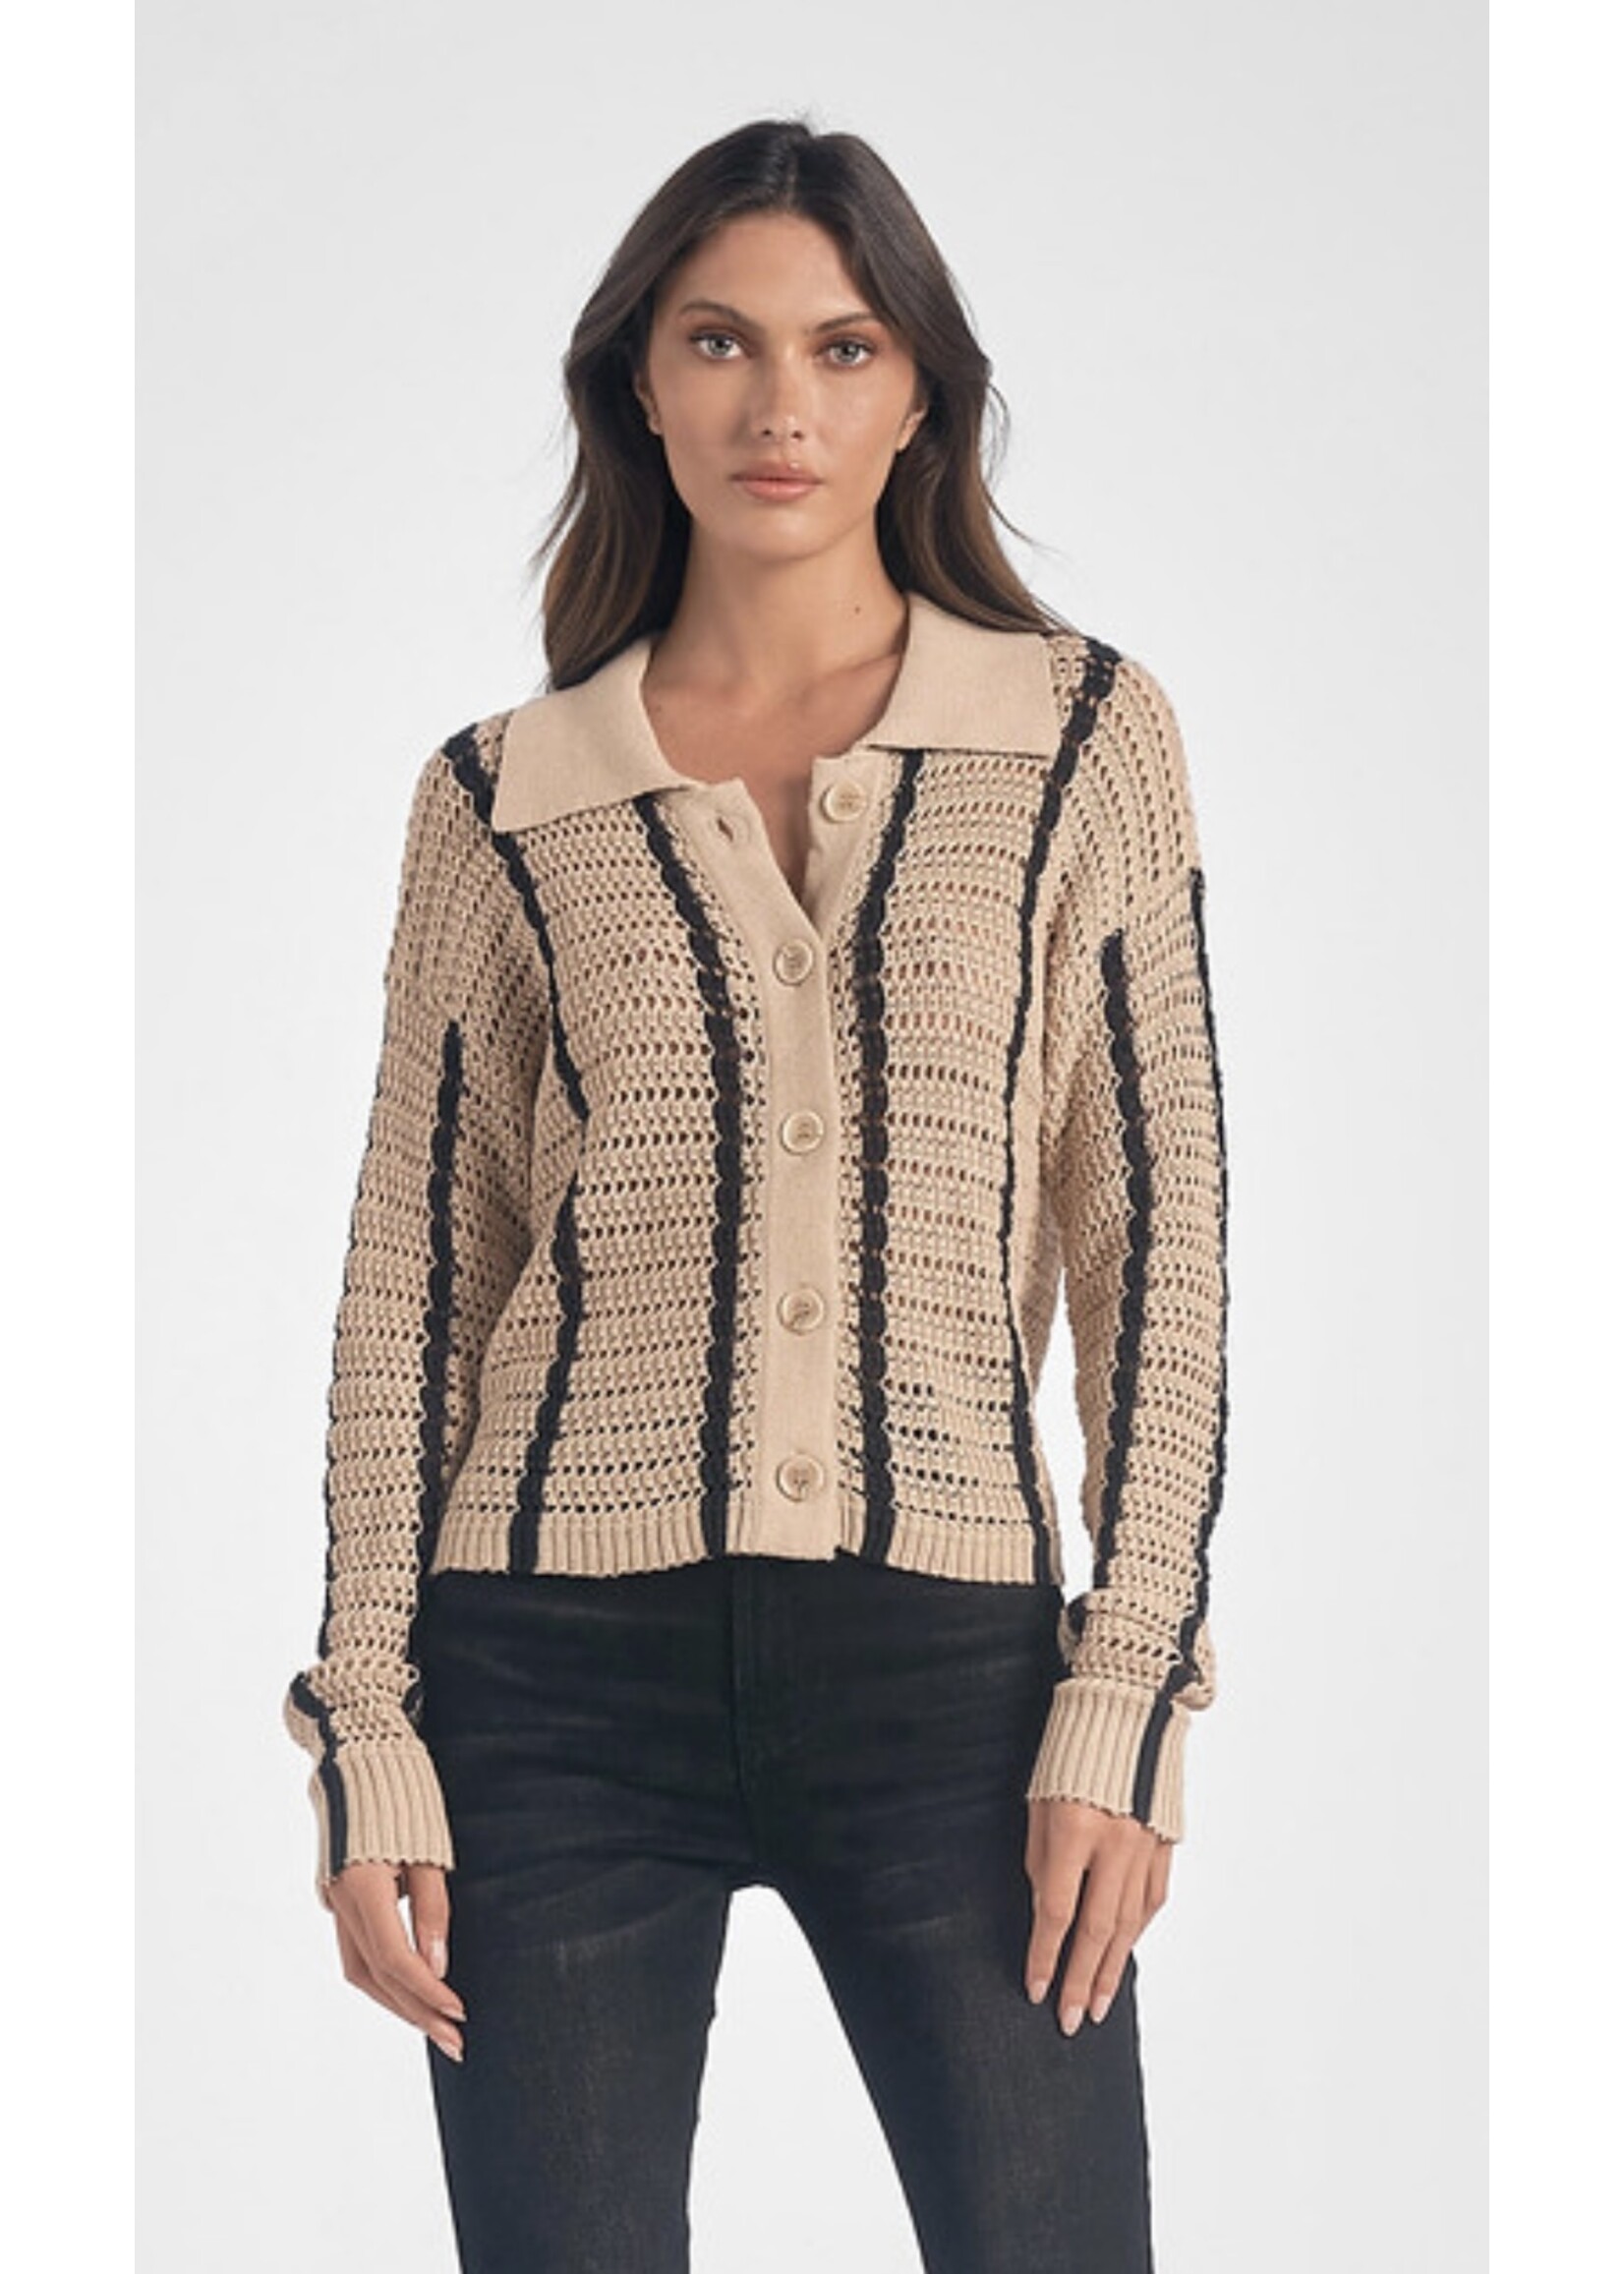 TAN AND BLACK BUTTON FRONT KNIT TOP